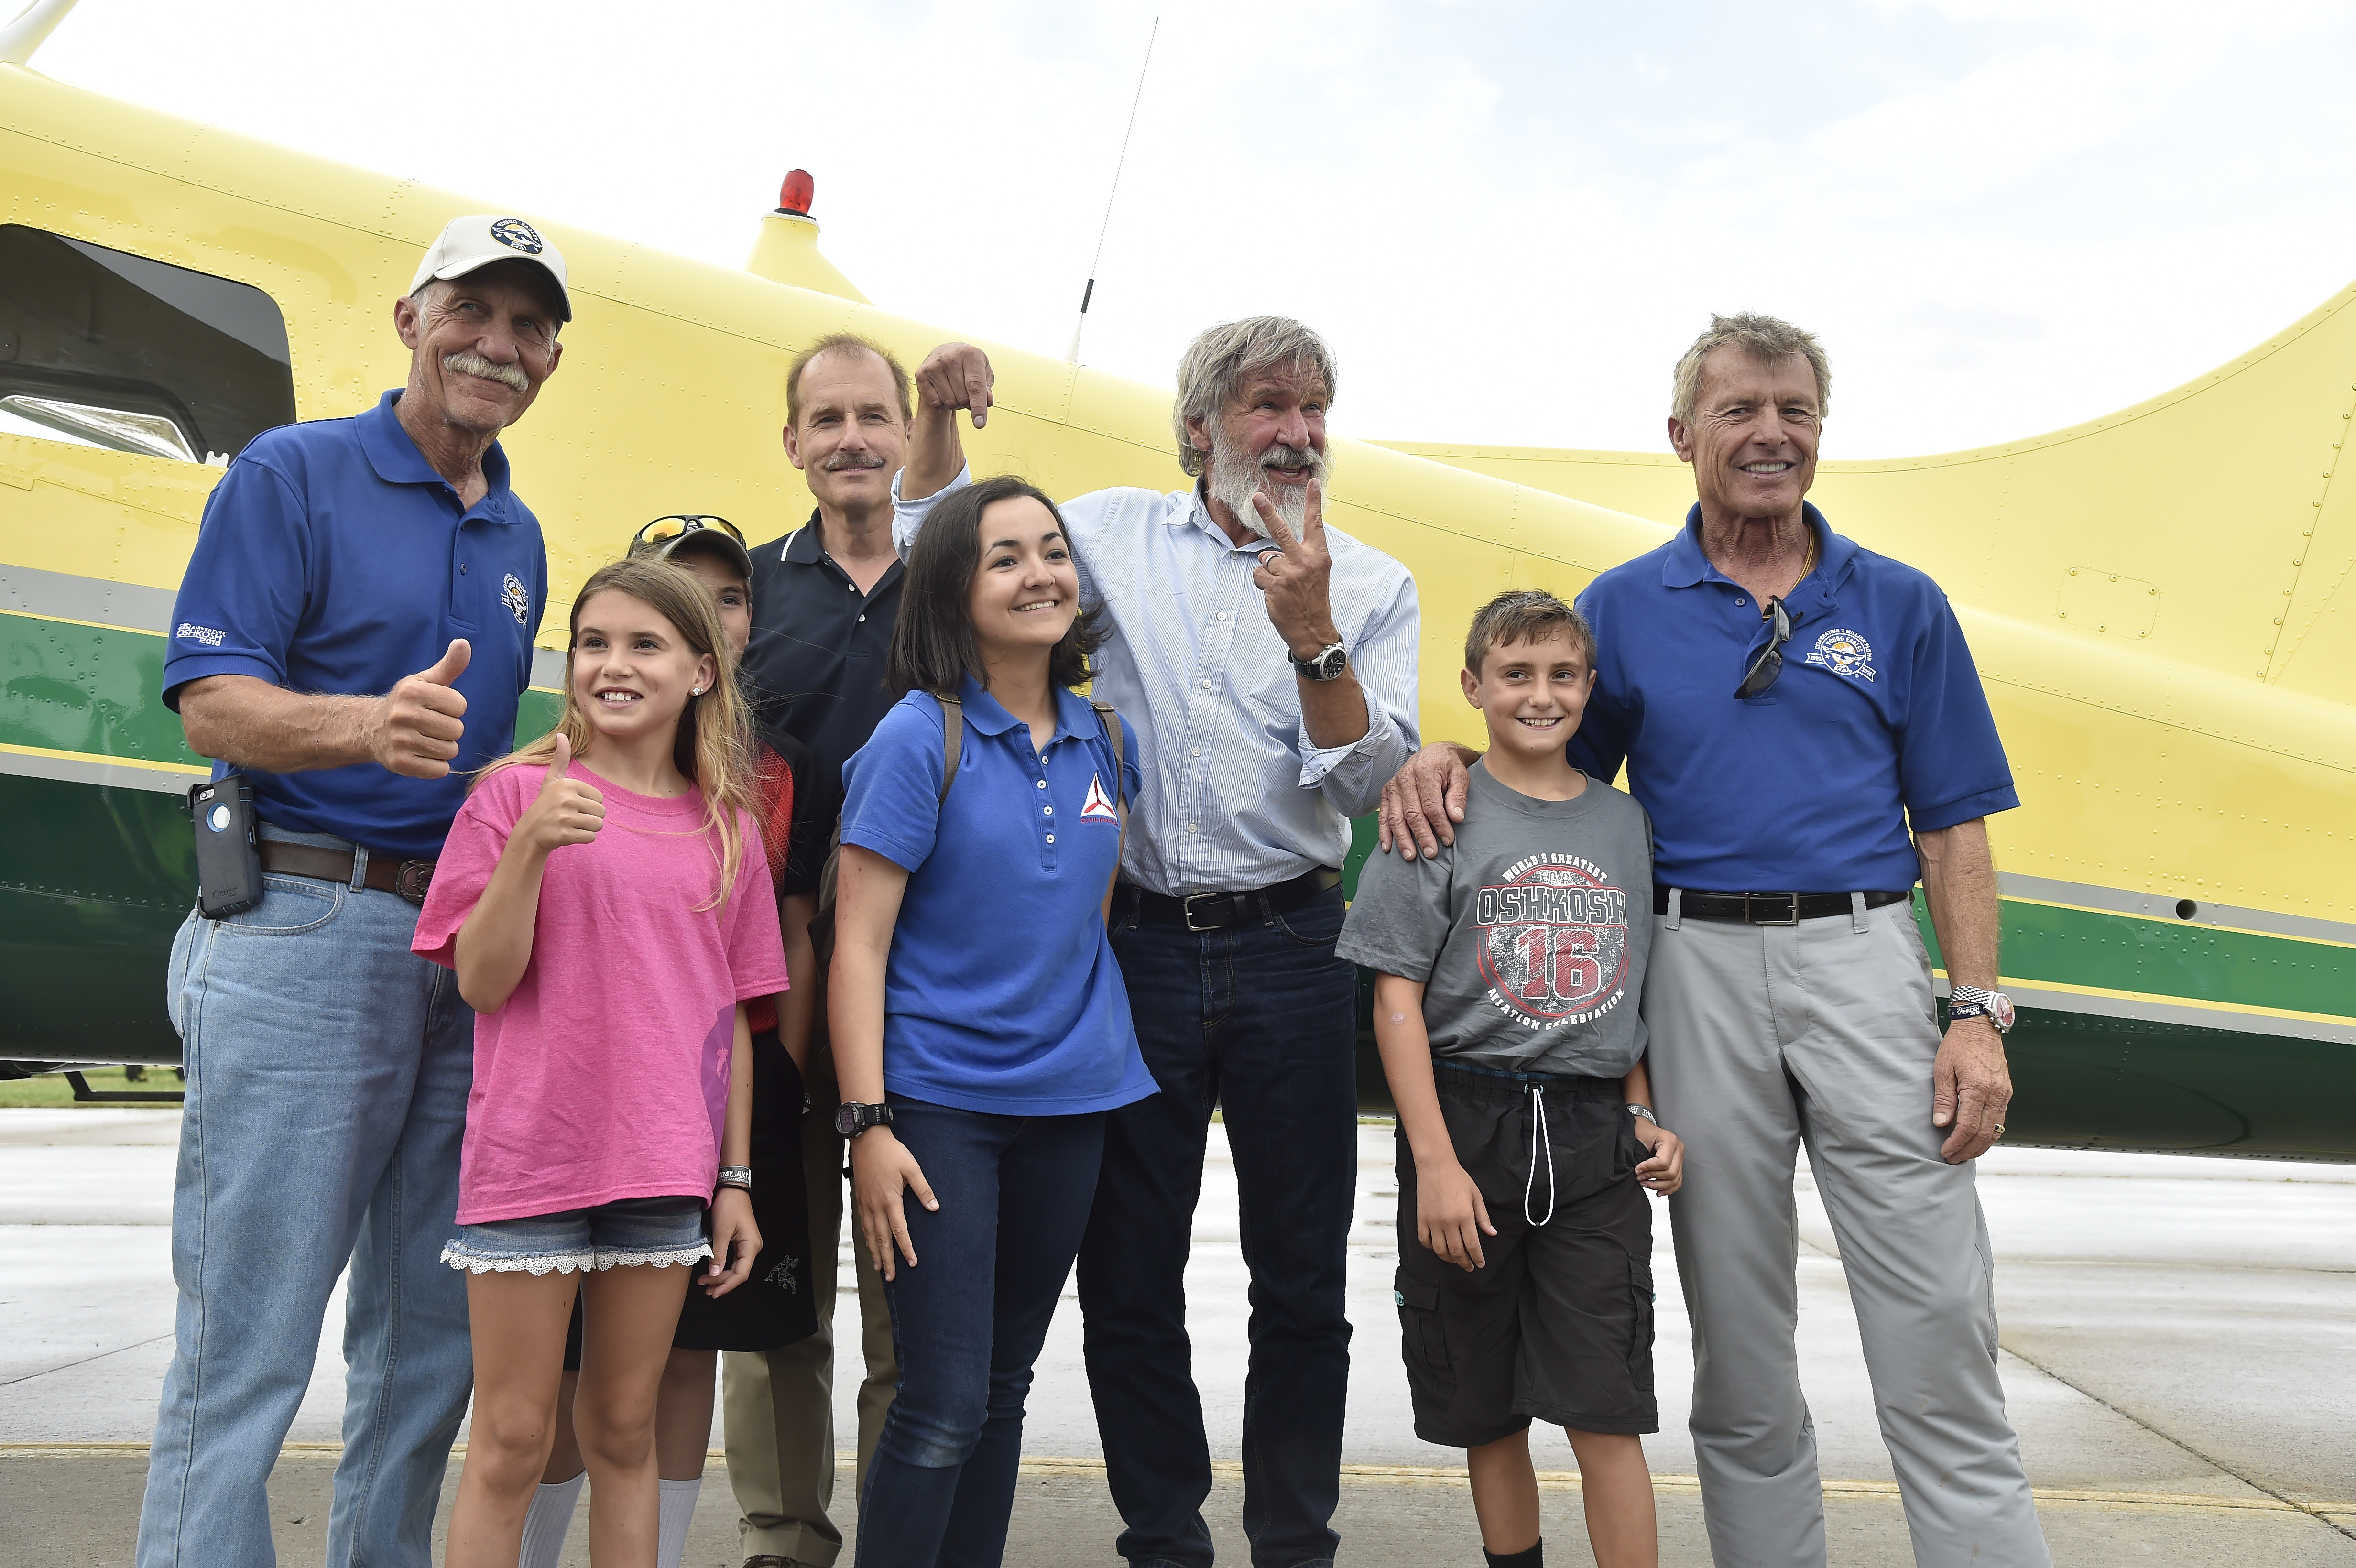 Actor and pilot Harrison Ford poses for photos with Jodie Gawthrop, the 2 millionth EAA Young Eagle, with airshow performer and current Young Eagle chairman Sean D. Tucker and other Young Eagles and pilots during EAA AirVenture at Wittman Regional Airport in Oshkosh July 28. Photo by David Tulis.